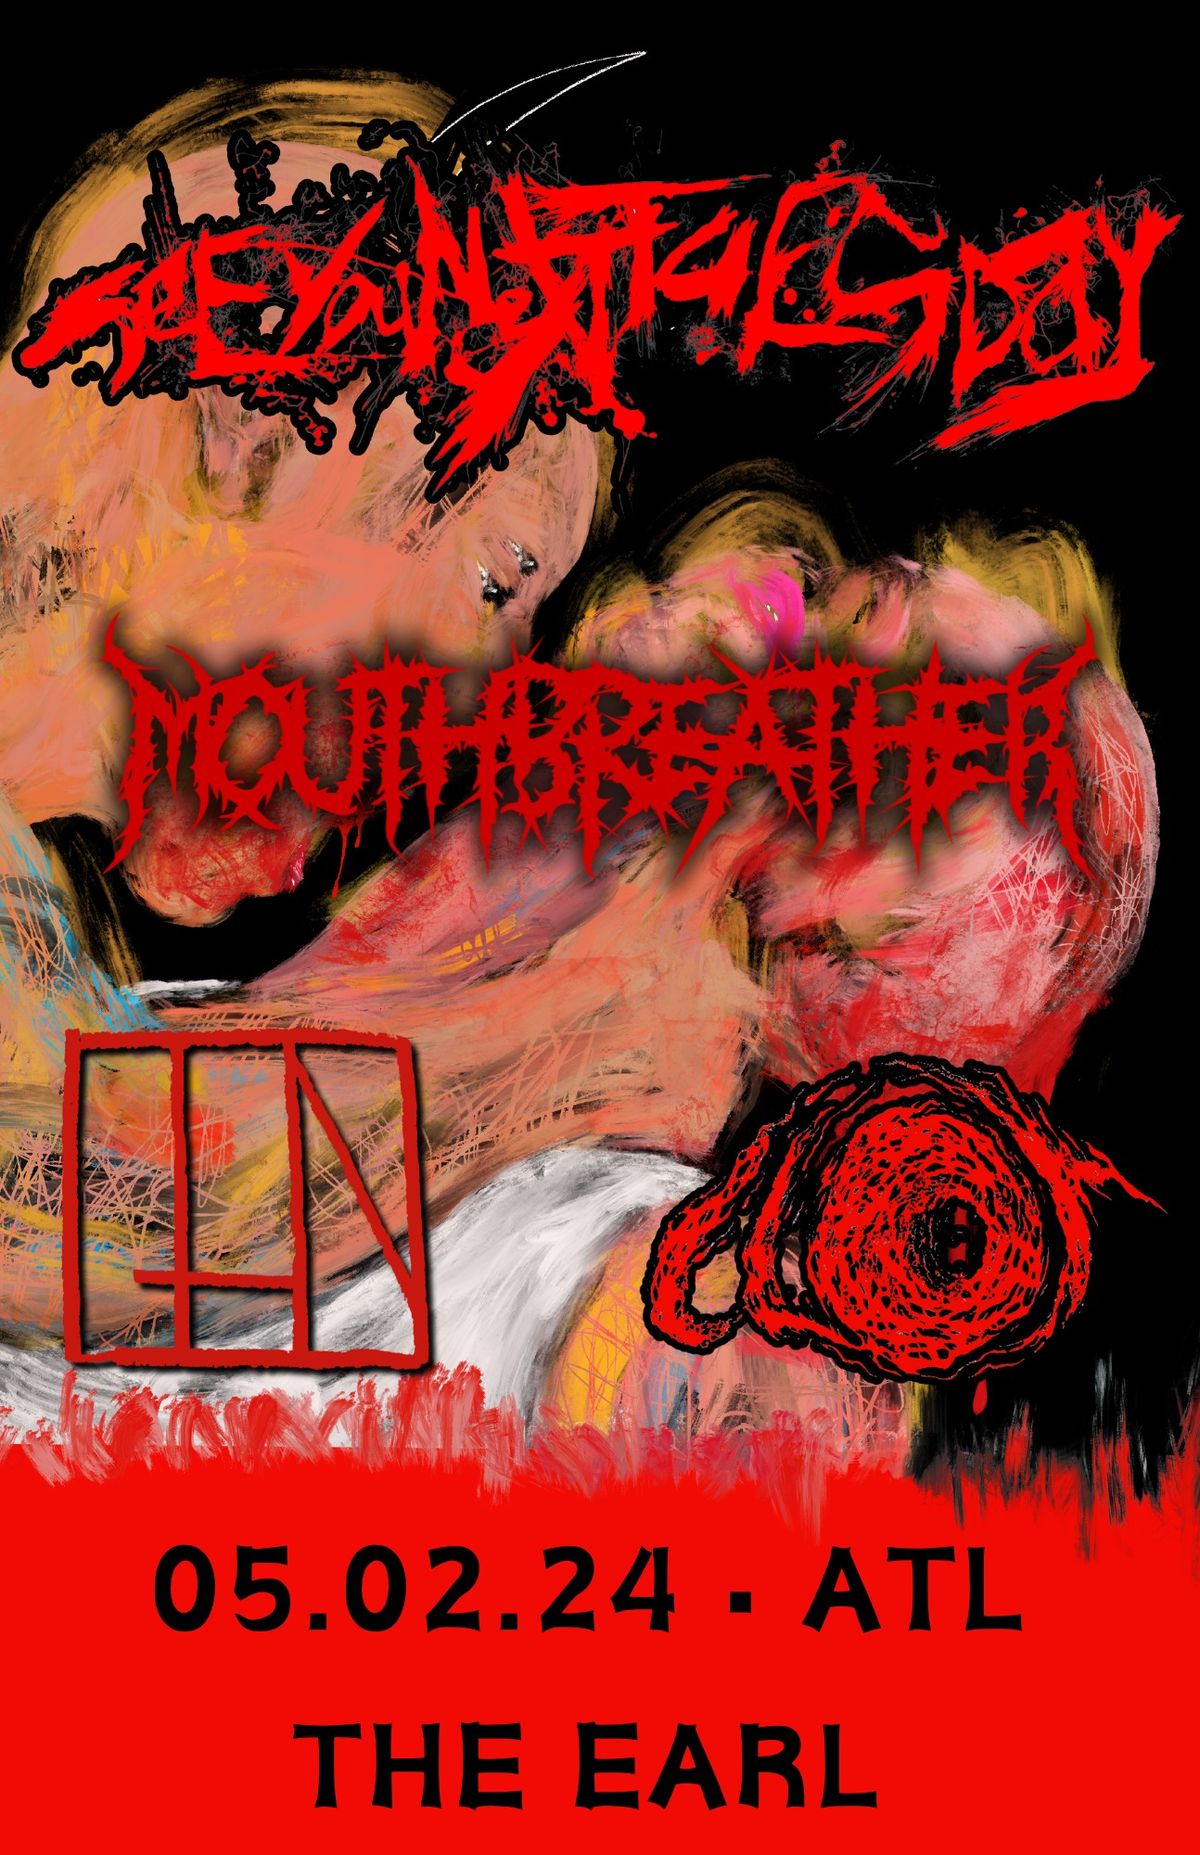 See You Next Tuesday \/ Mouthbreather \/ Thin \/ Clot at The EARL